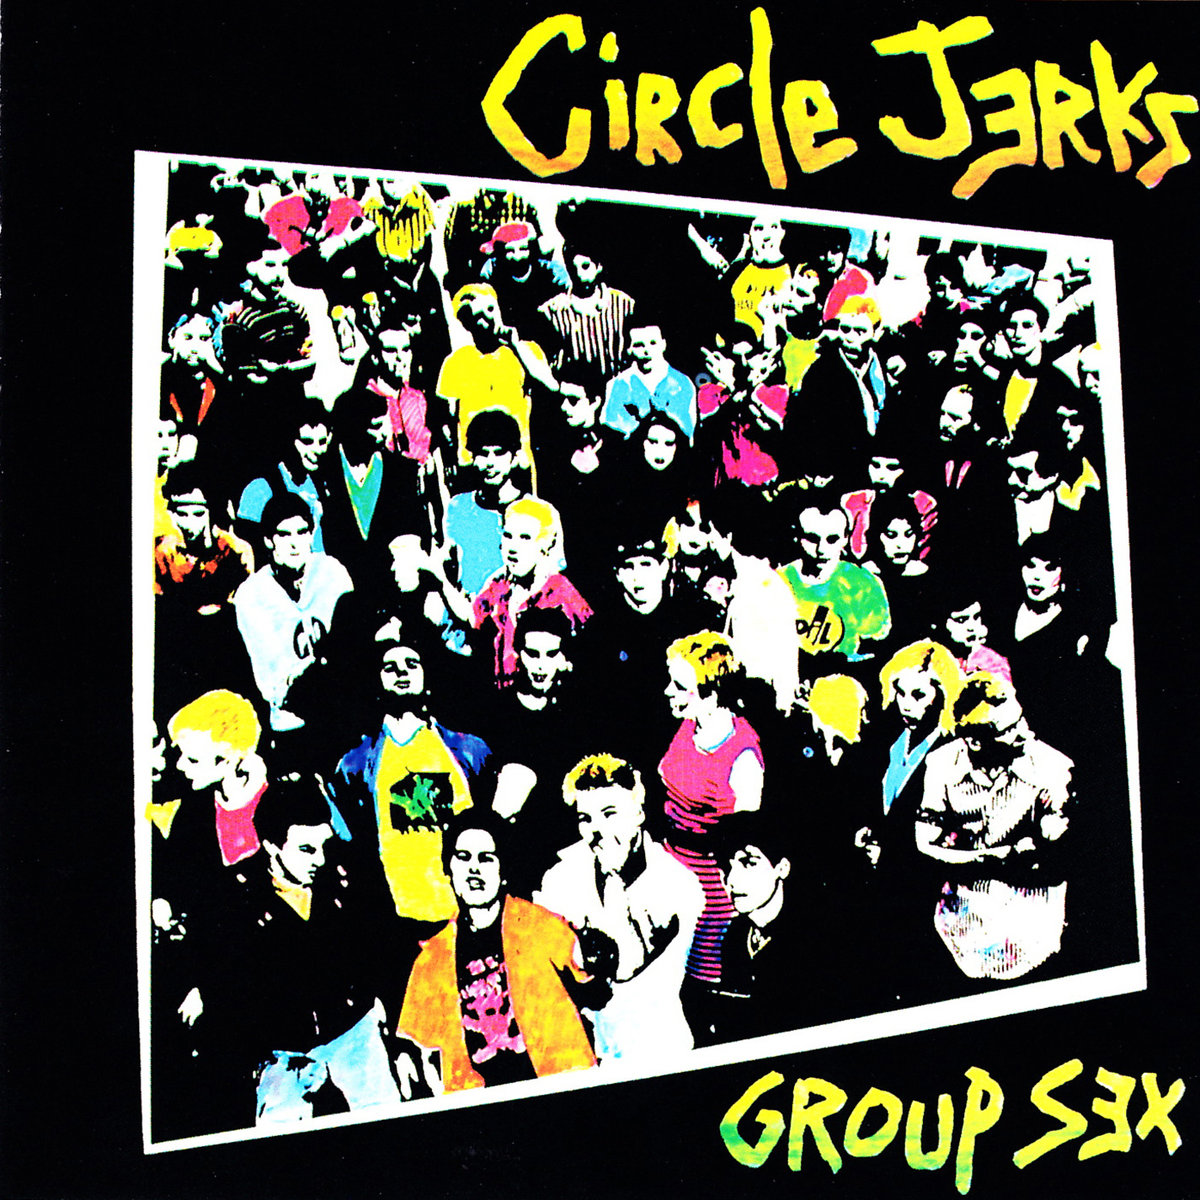 Circle Jerks kick off 40th anniversary 'Group Sex' shows in Canada